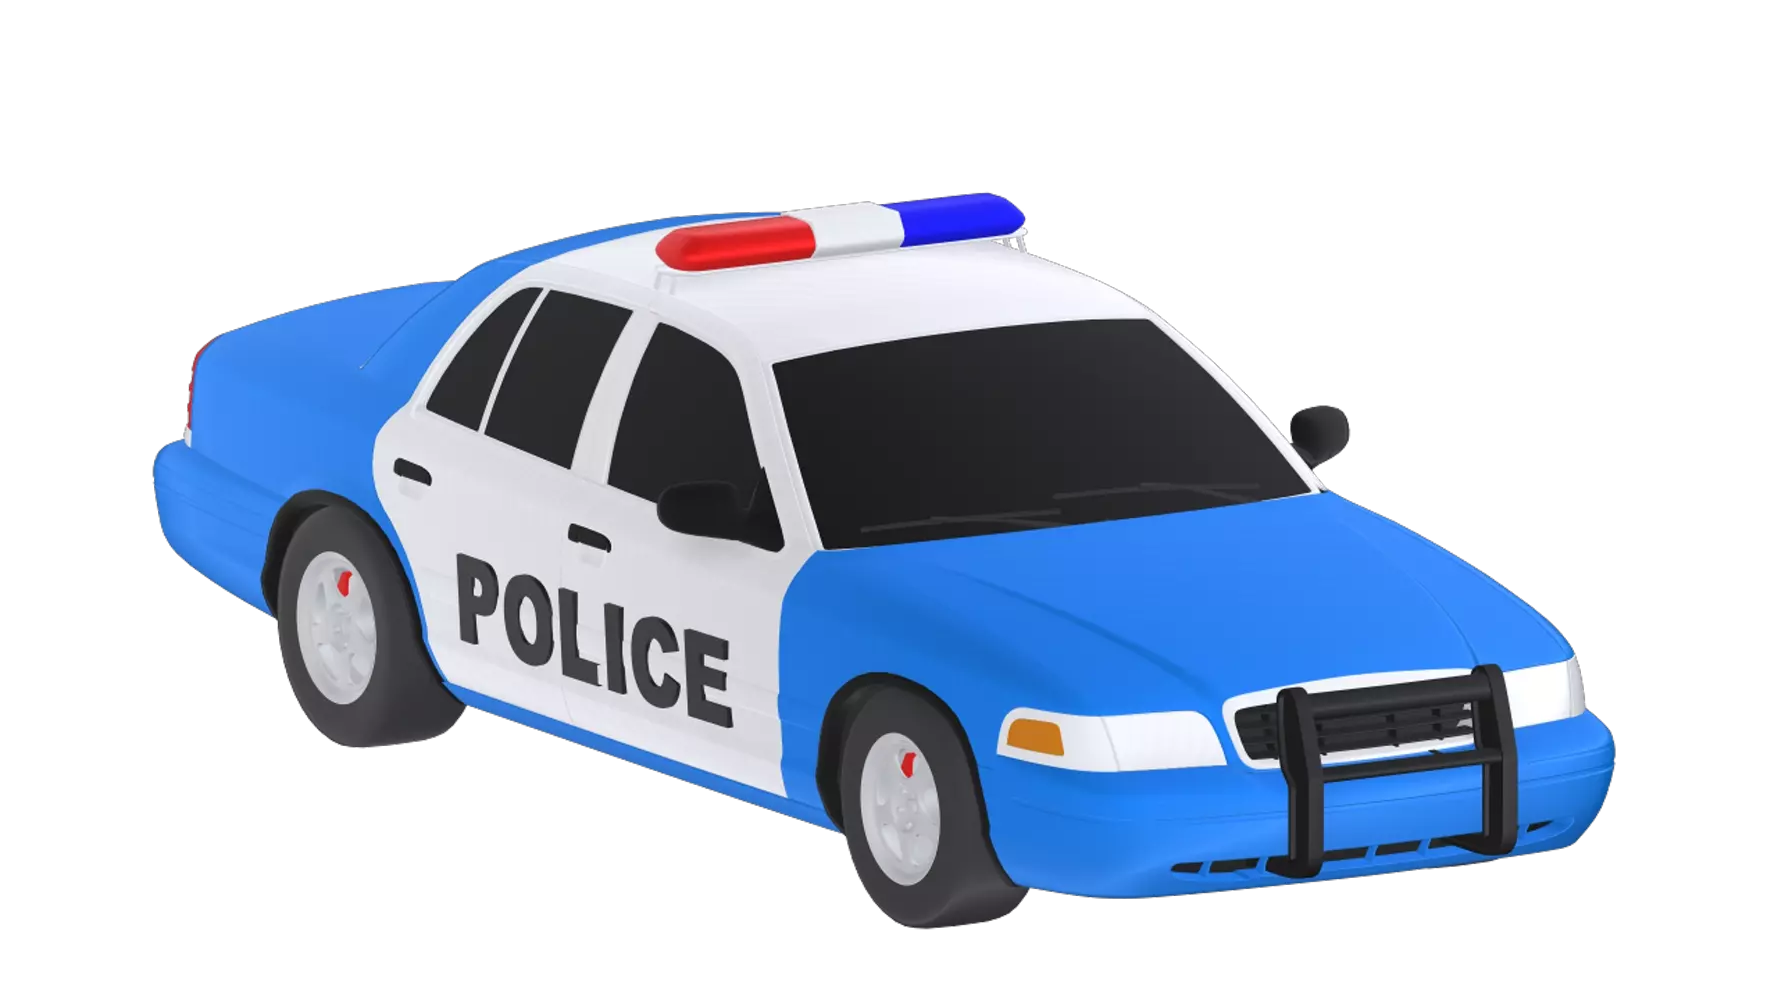 Police Car 3D Graphic